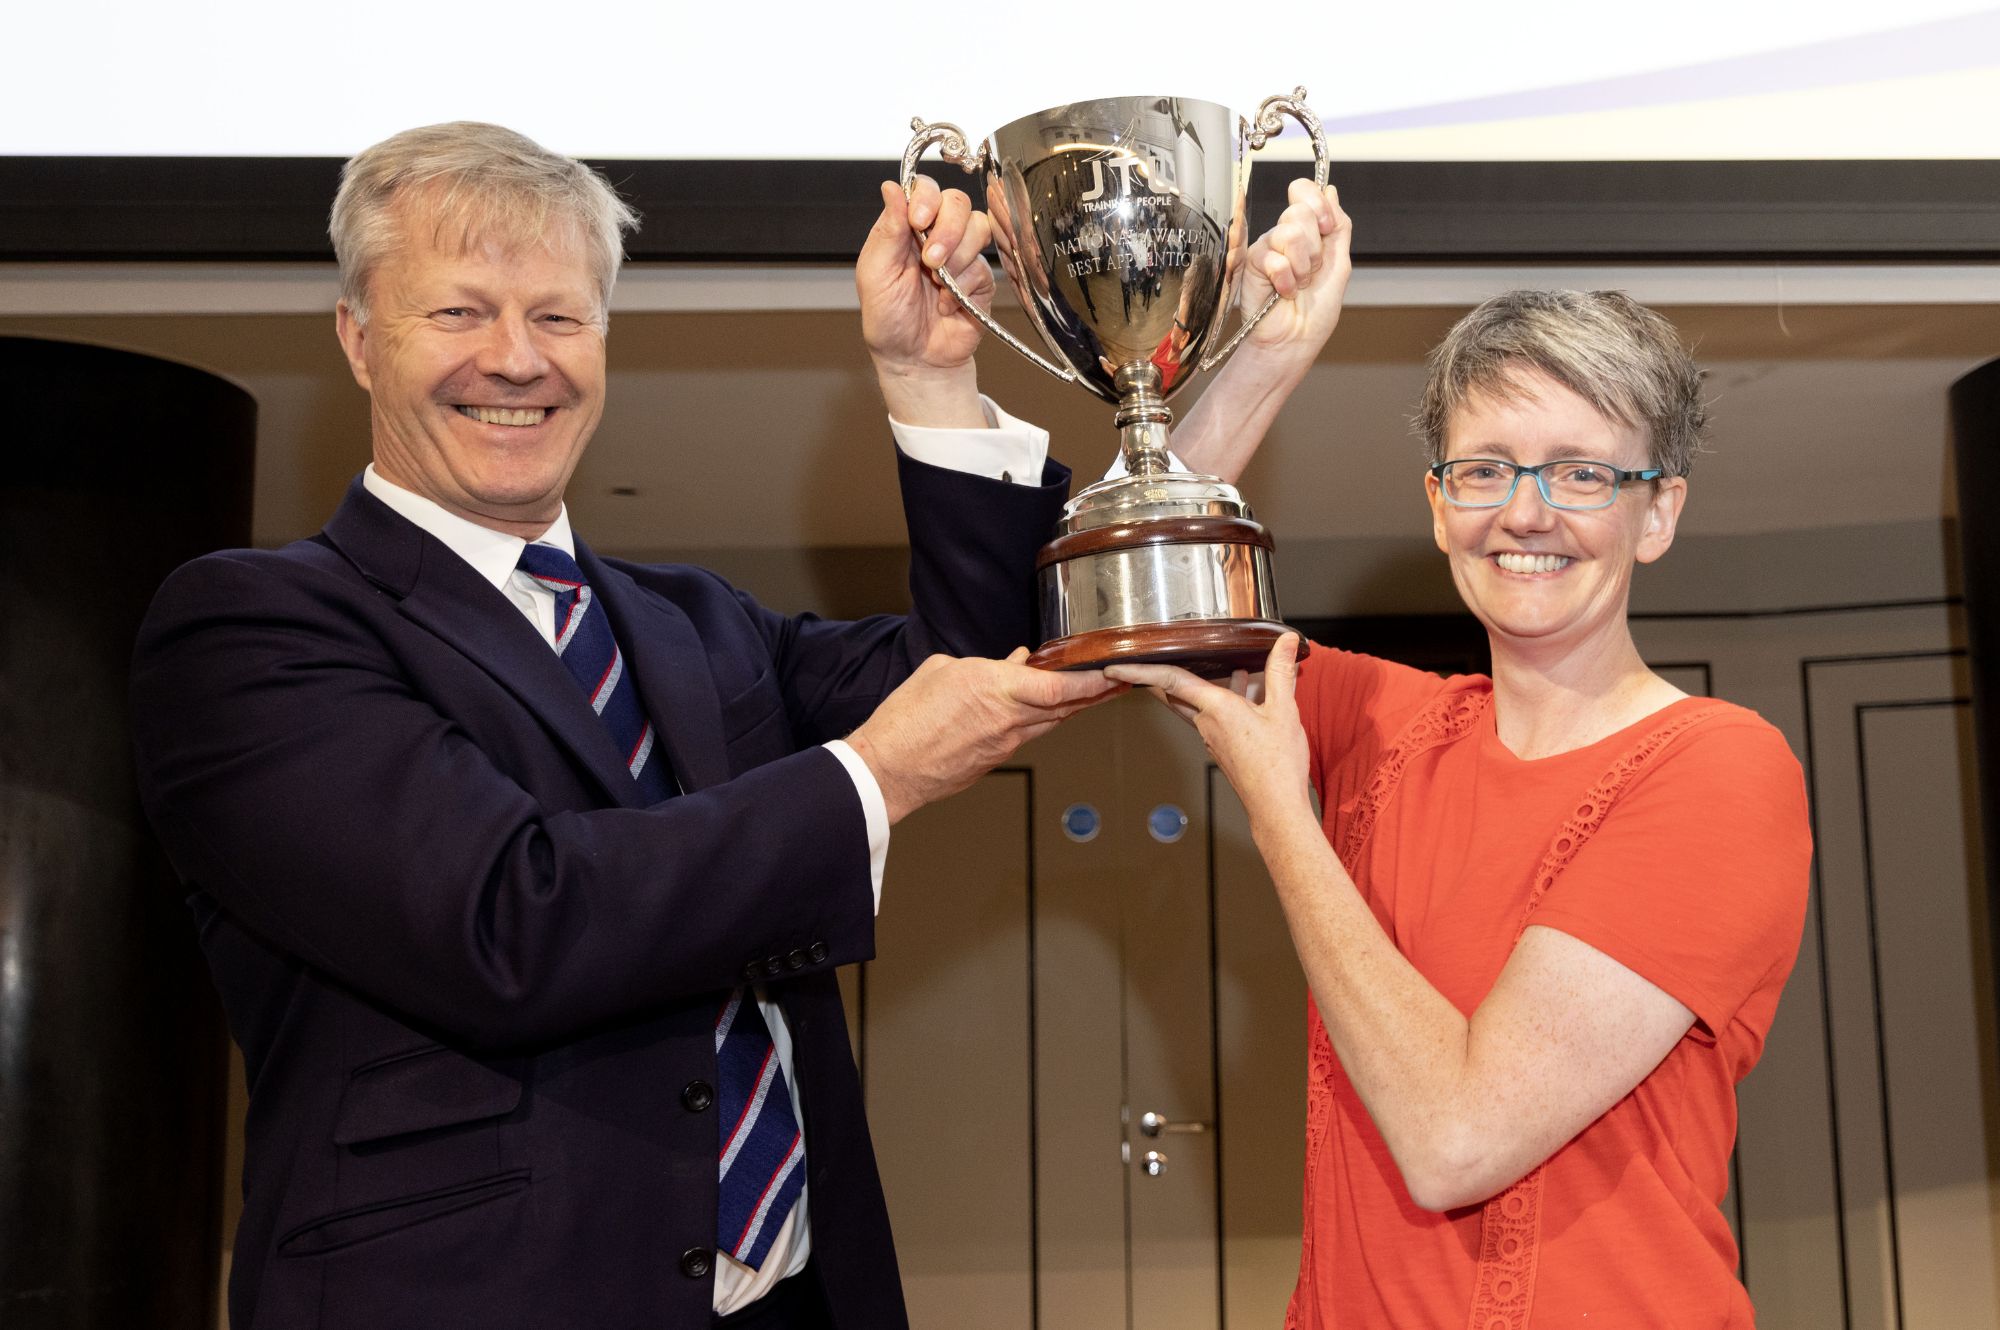 Amy Lister and JTL CEO Chris Claydon hold the National Awards trophy